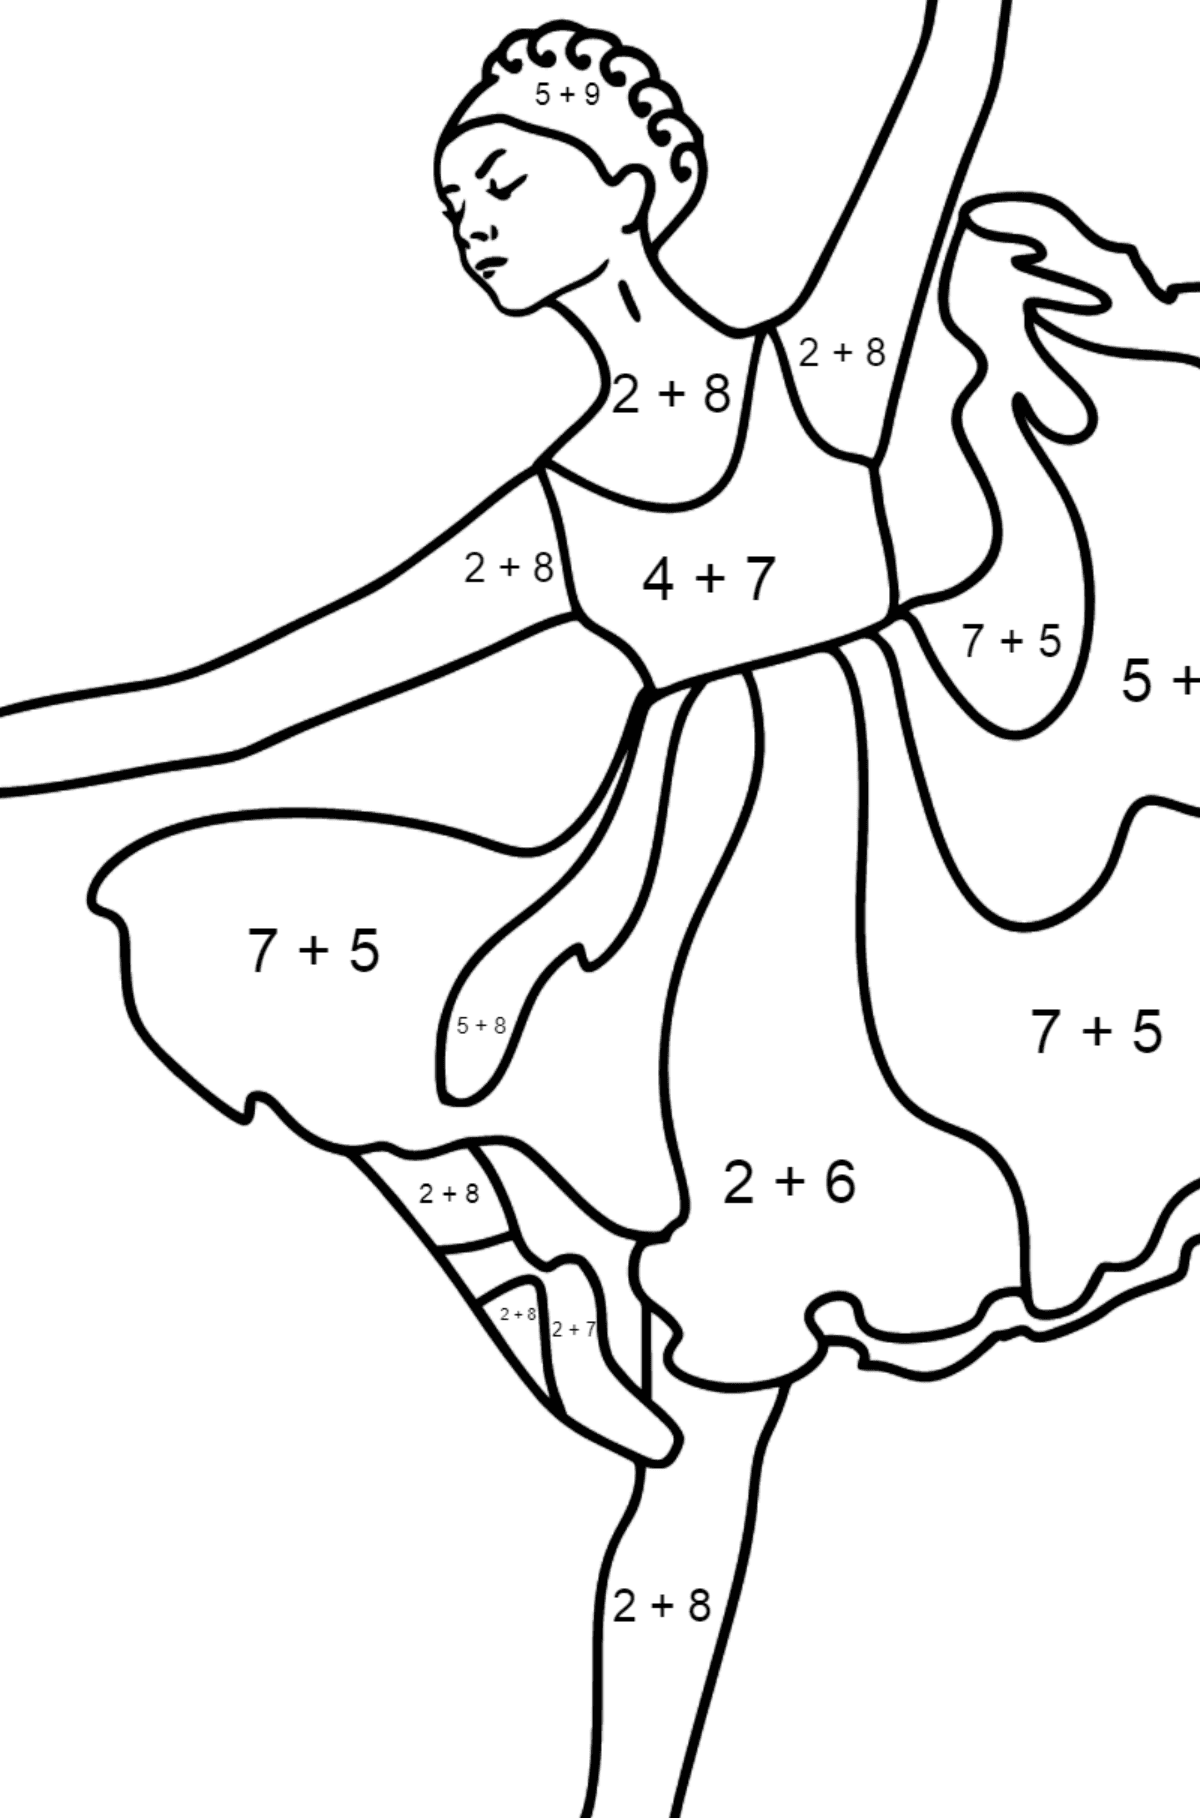 Ballerina in Lilac Dress coloring page - Math Coloring - Addition for Kids